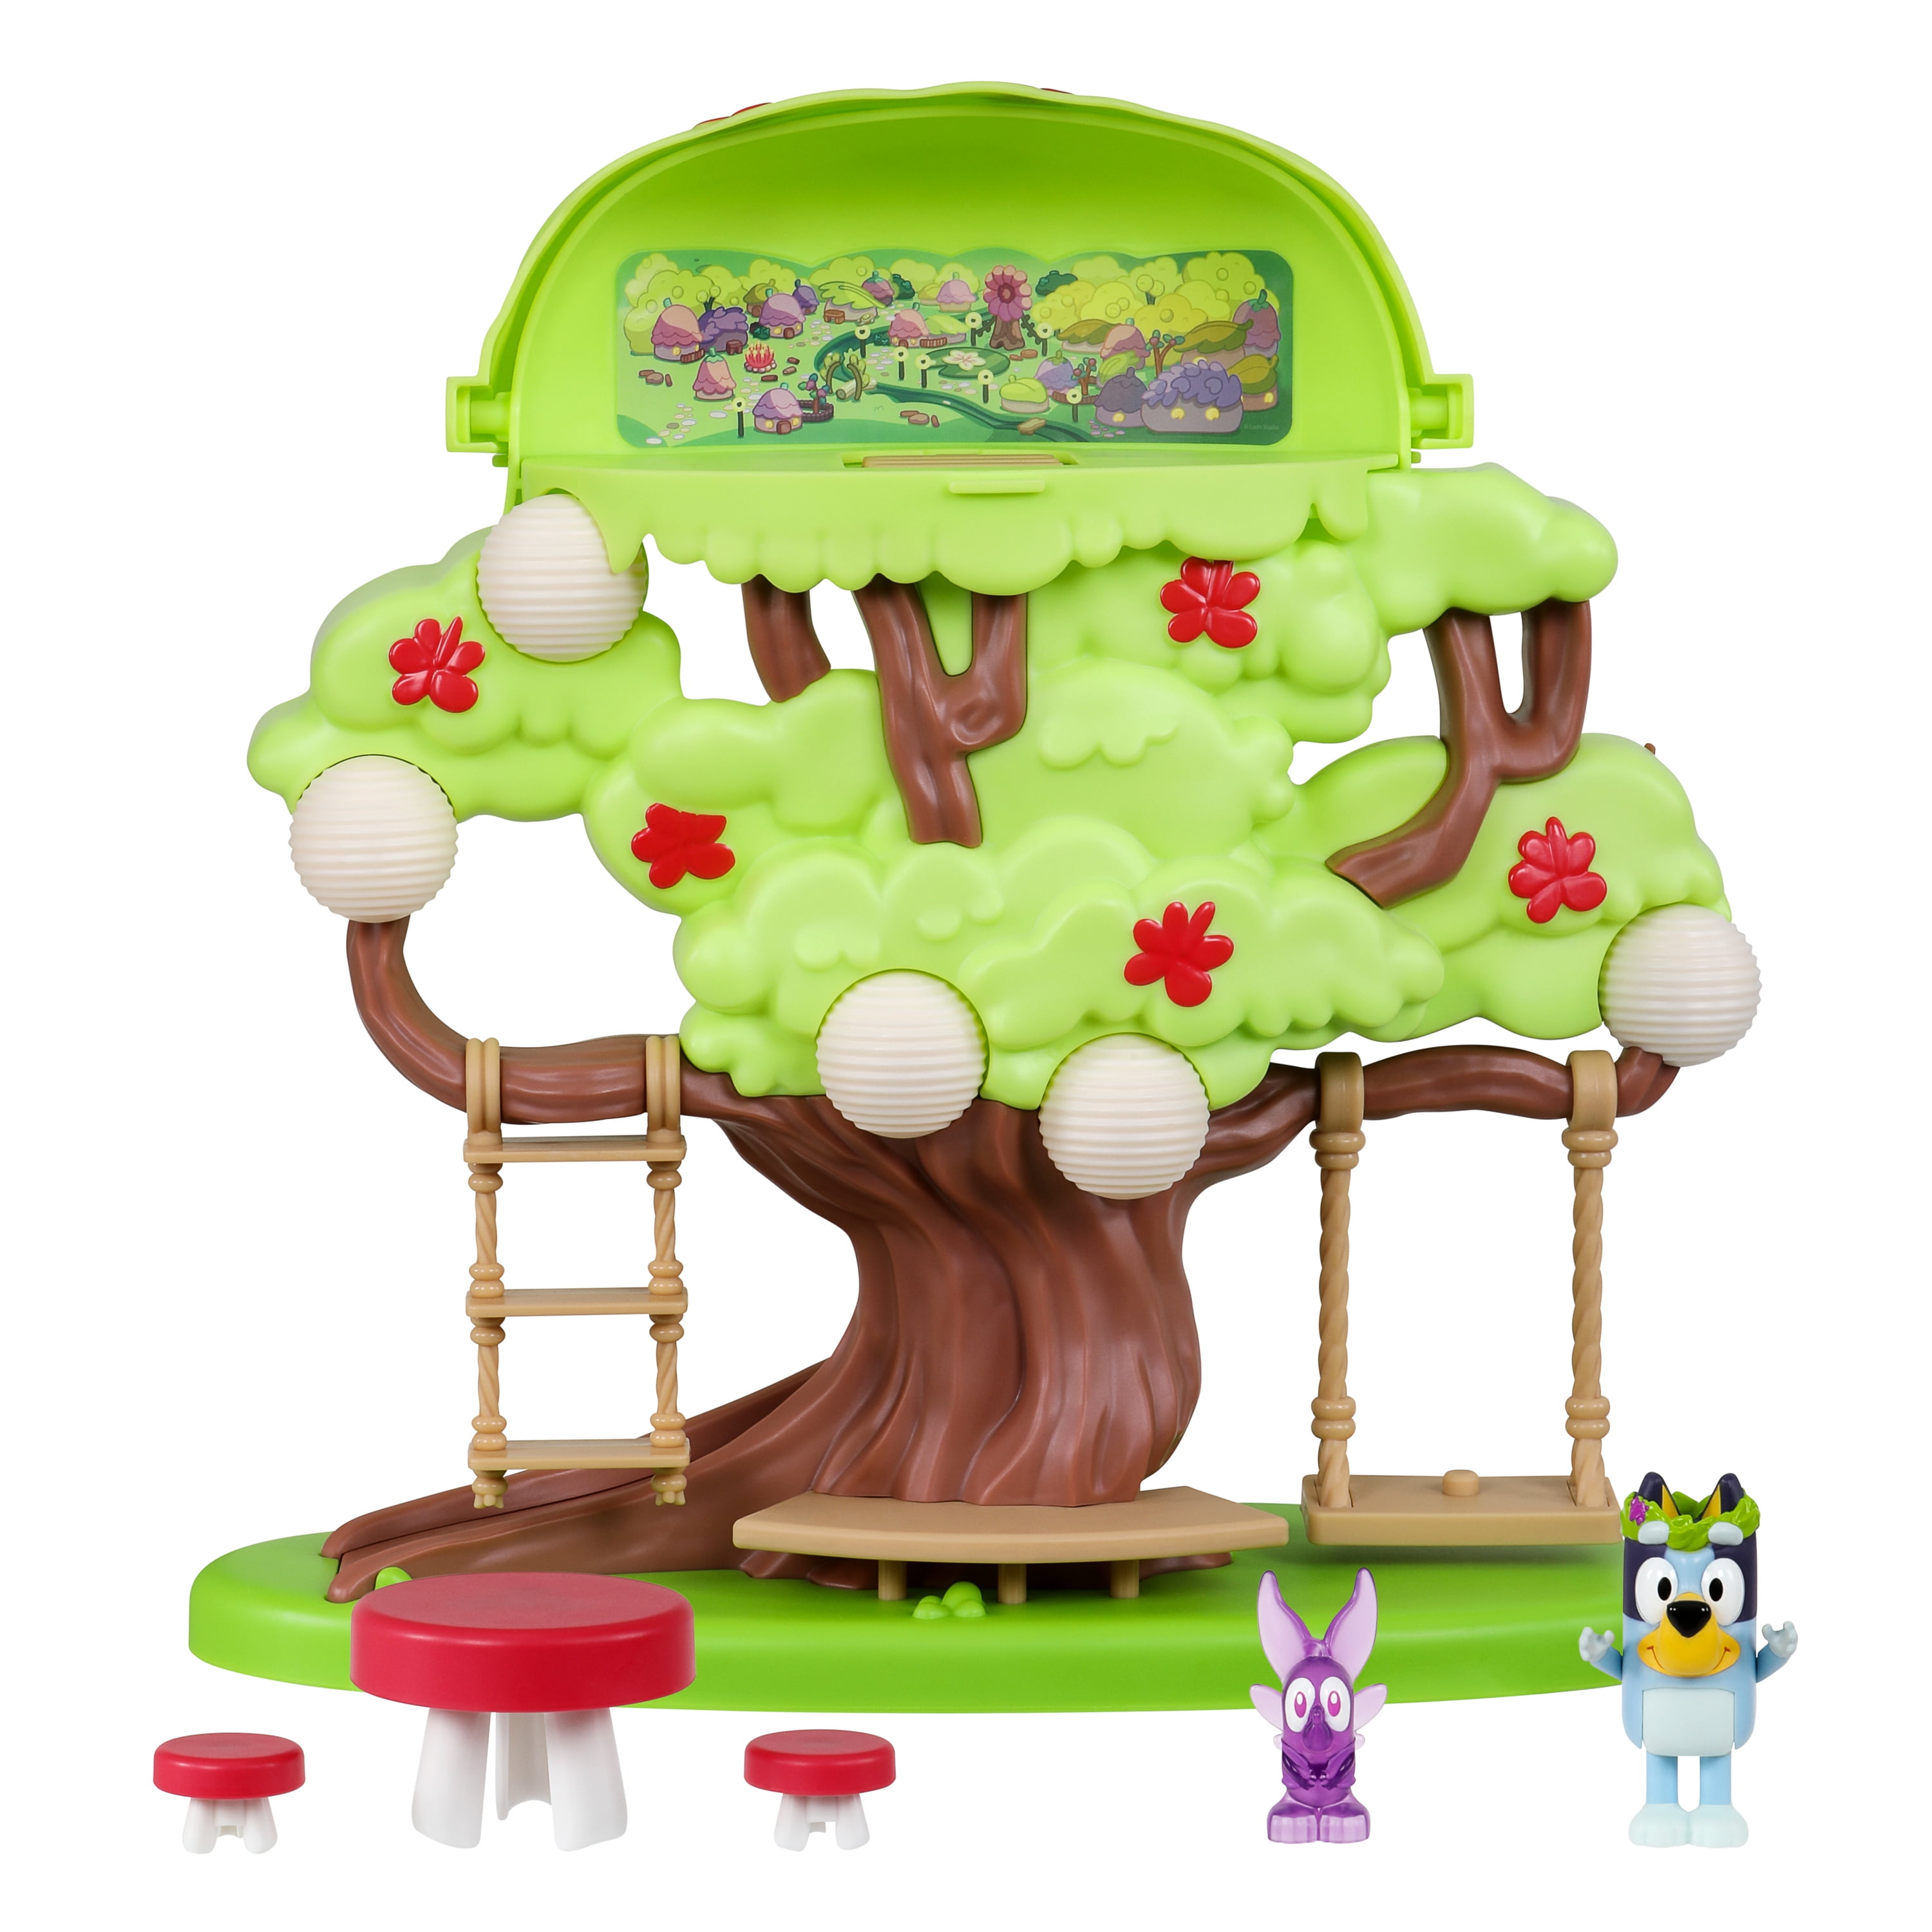 Bluey Tree Playset Flower Crown Bluey, Fairy Figures, and Accessories Preschool Ages 3+